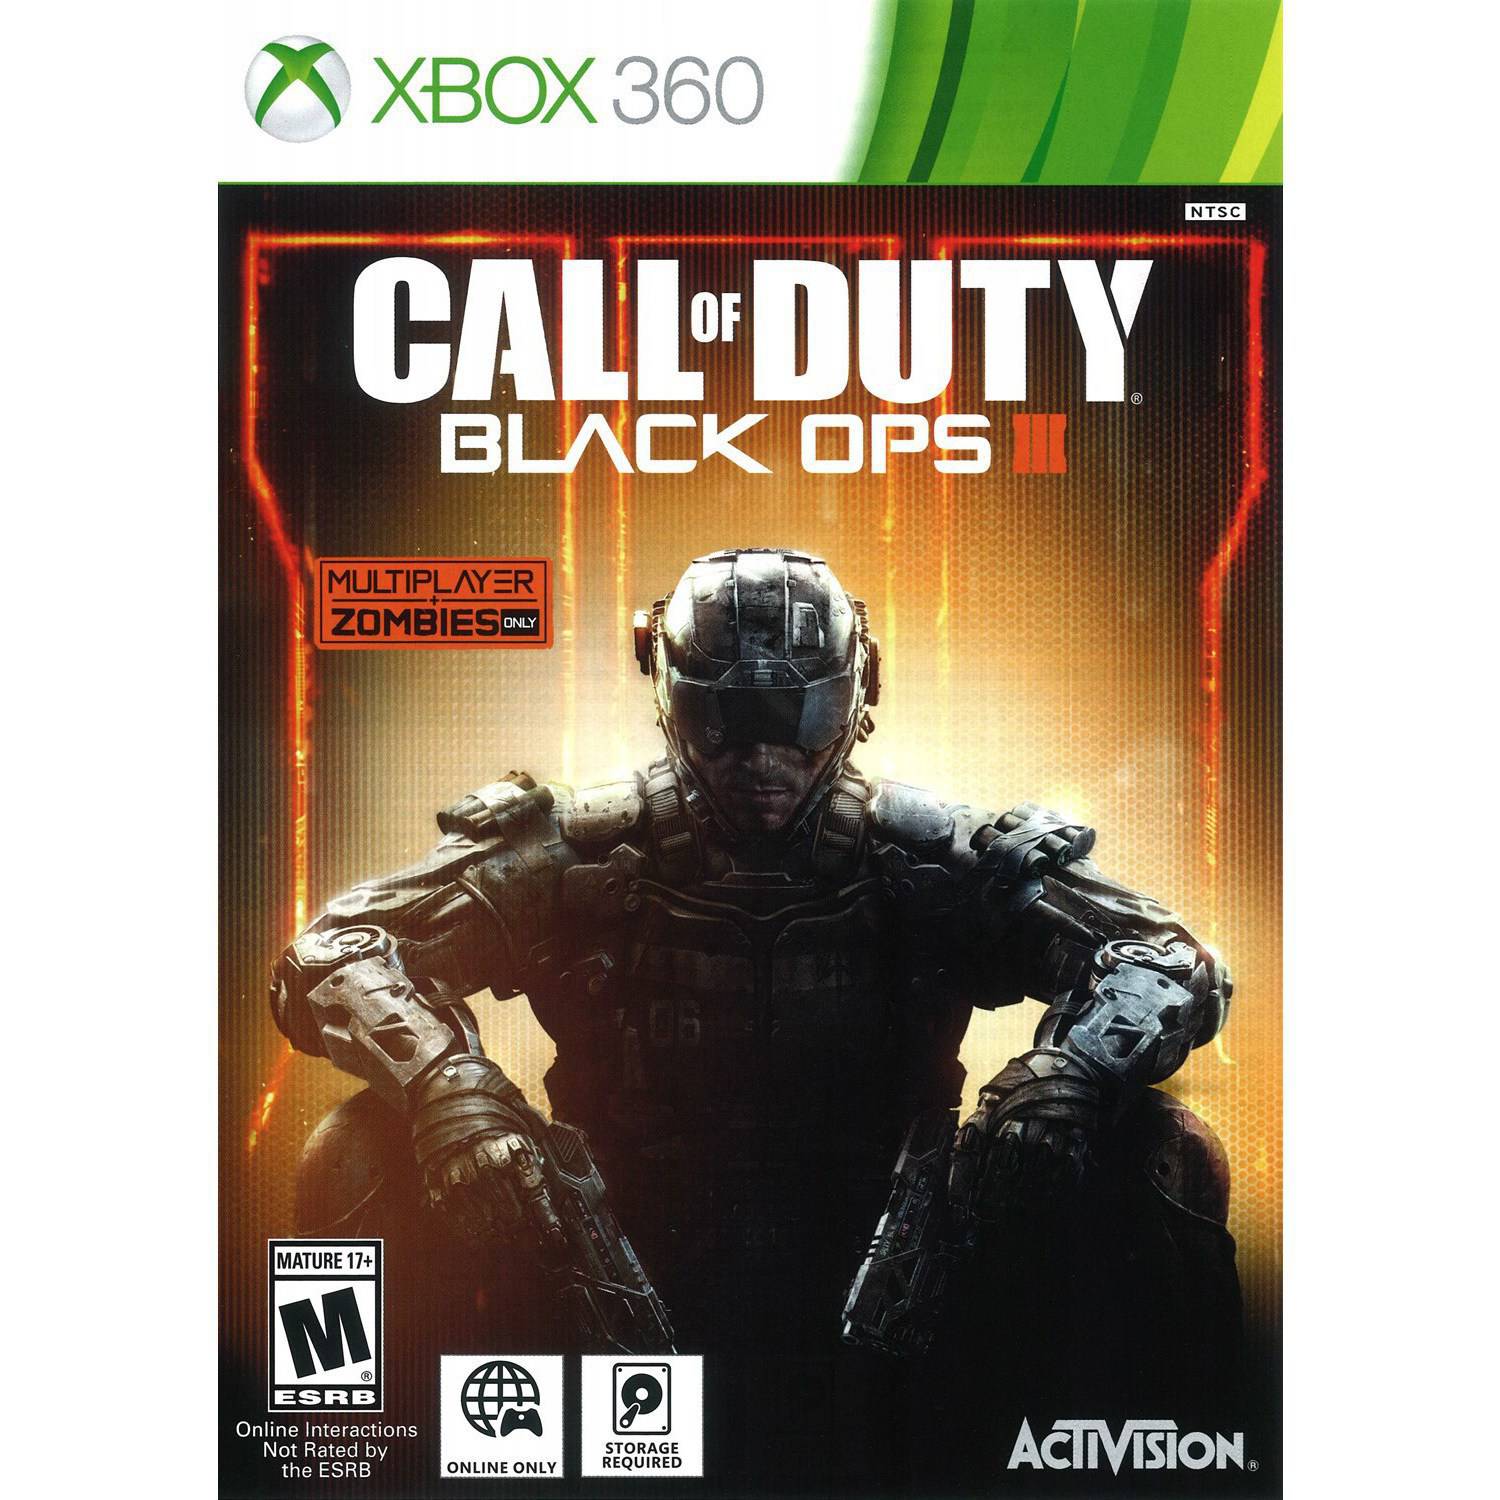 Call of duty black ops 3 free download xbox 360